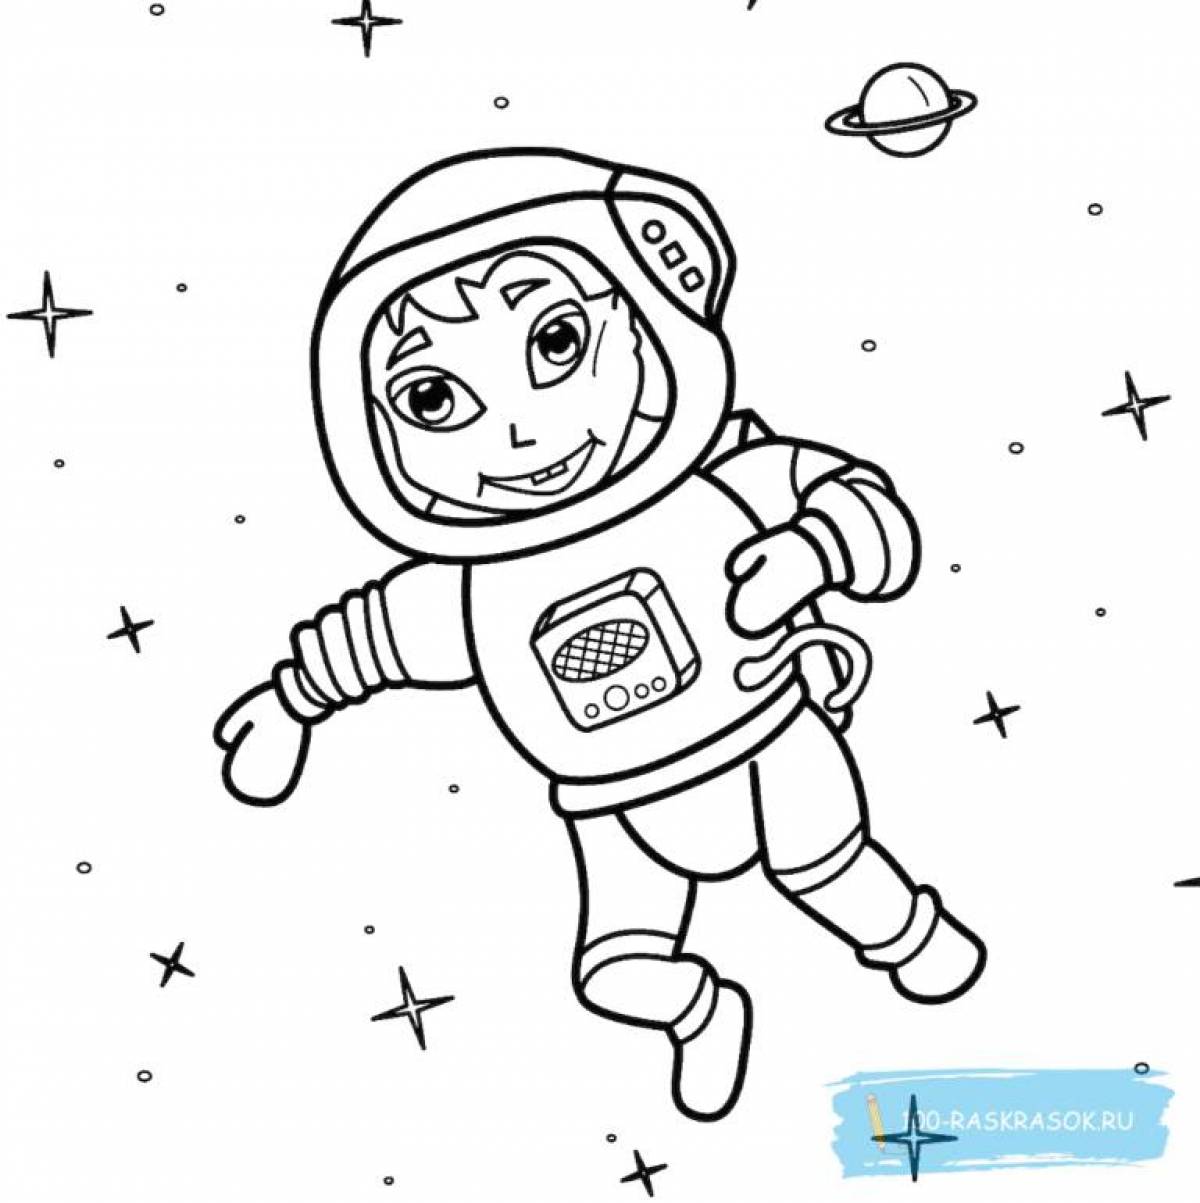 Coloring page wonderful astronaut